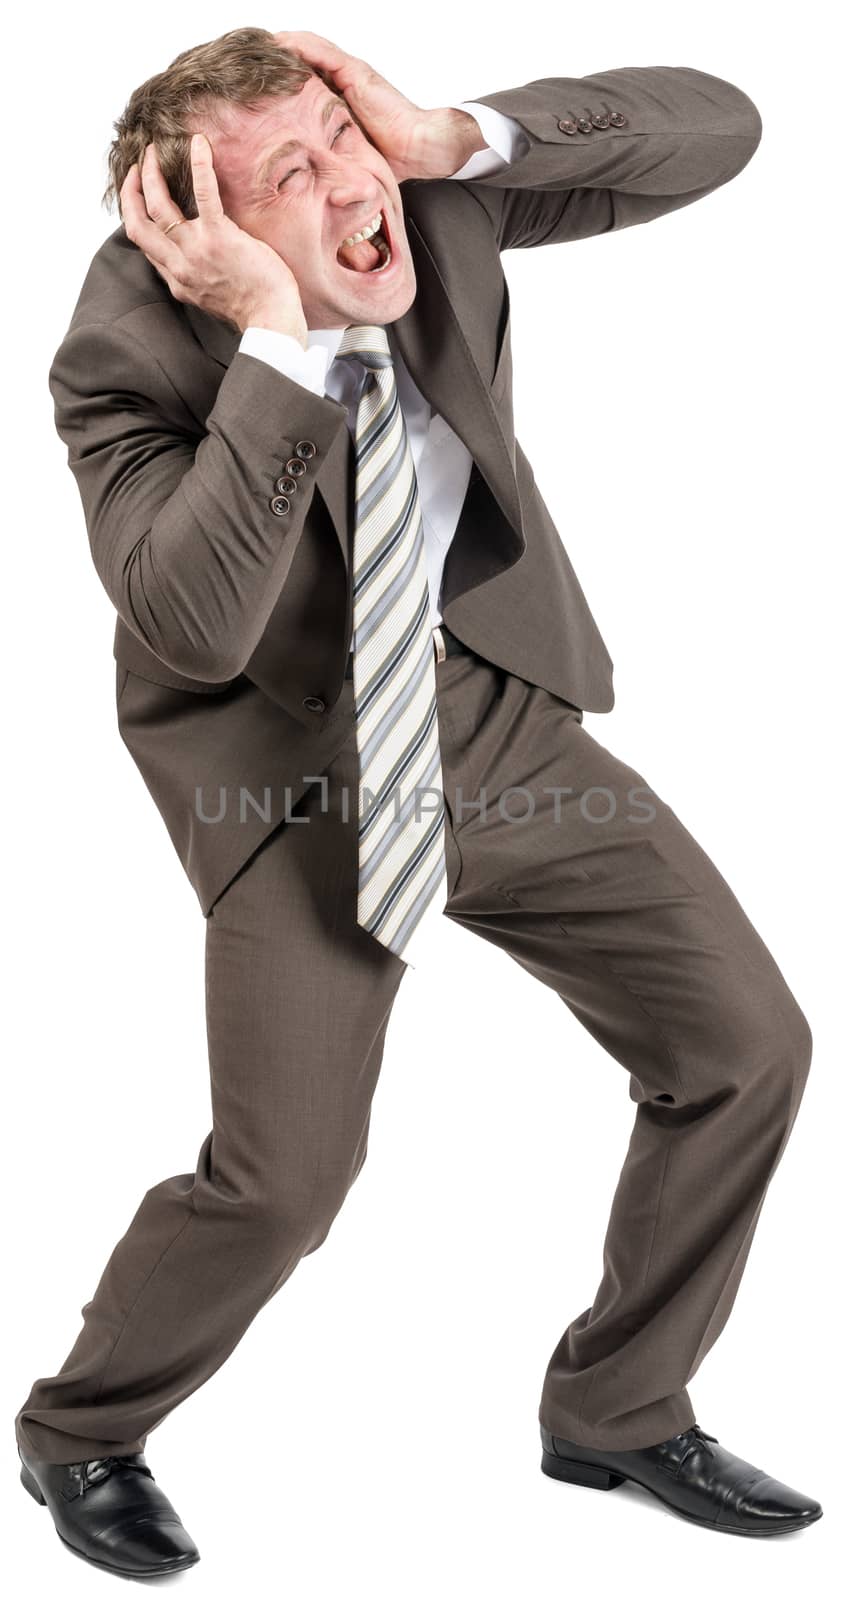 Screaming businessman covering his ears isolated on white background, closeup